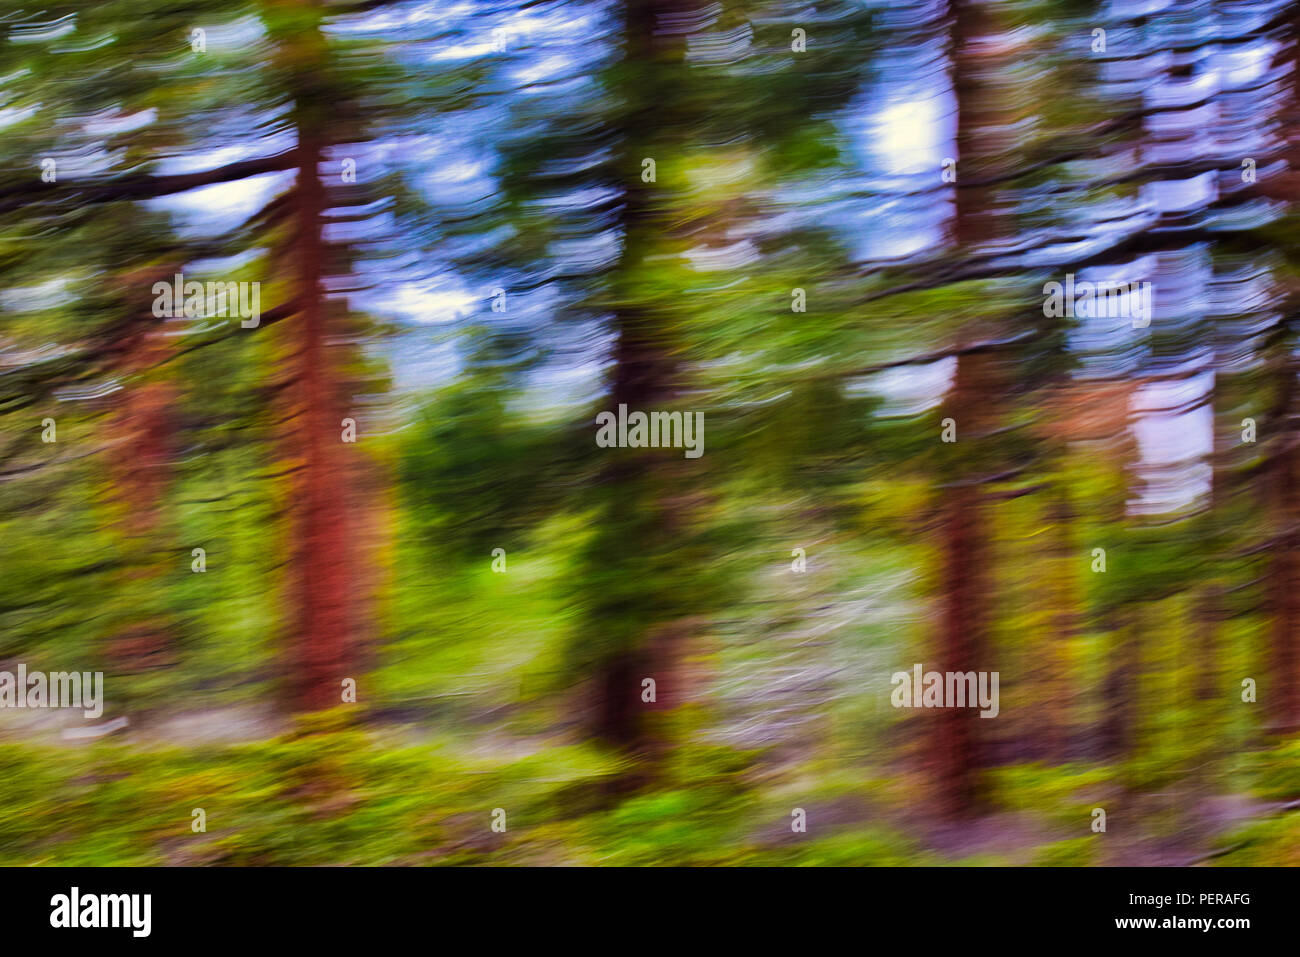 Abstract photo of a Ponderosa forest. Stock Photo